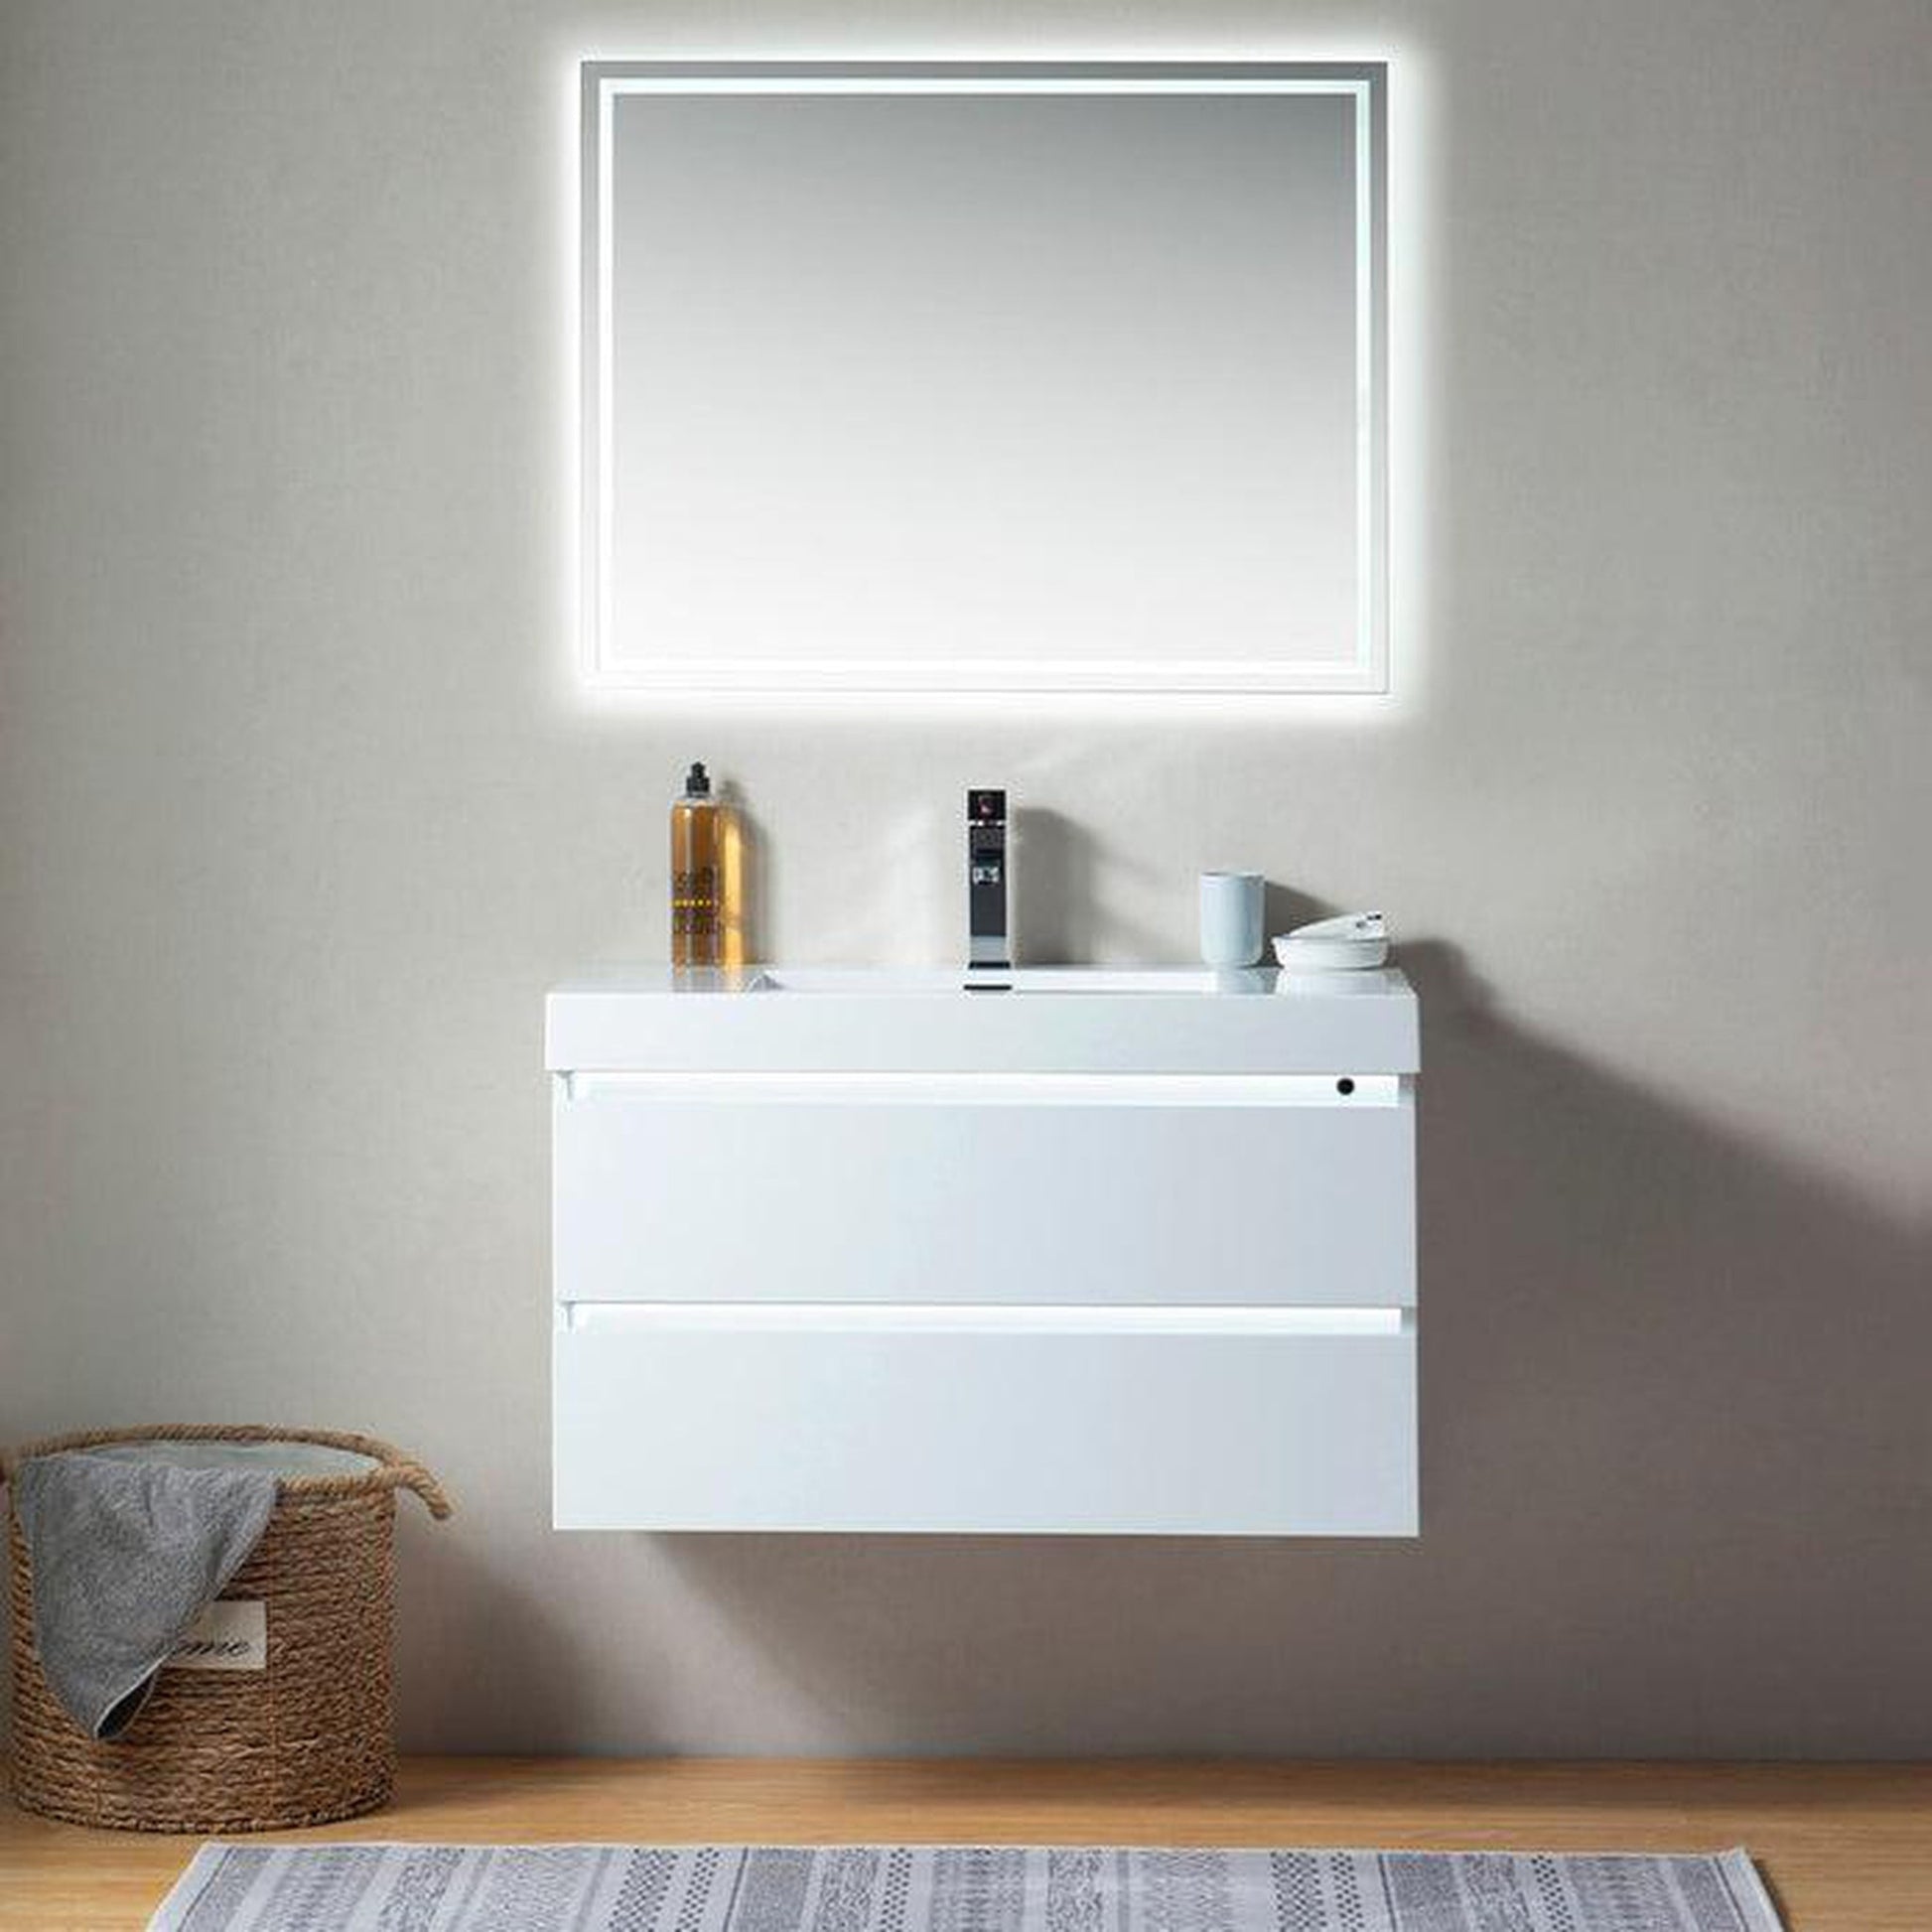 Vanity Art Annecy 36" Glossy White Wall Mounted Vanity Set With White Engineered Stone Top, Integrated Single Sink, and Mirror